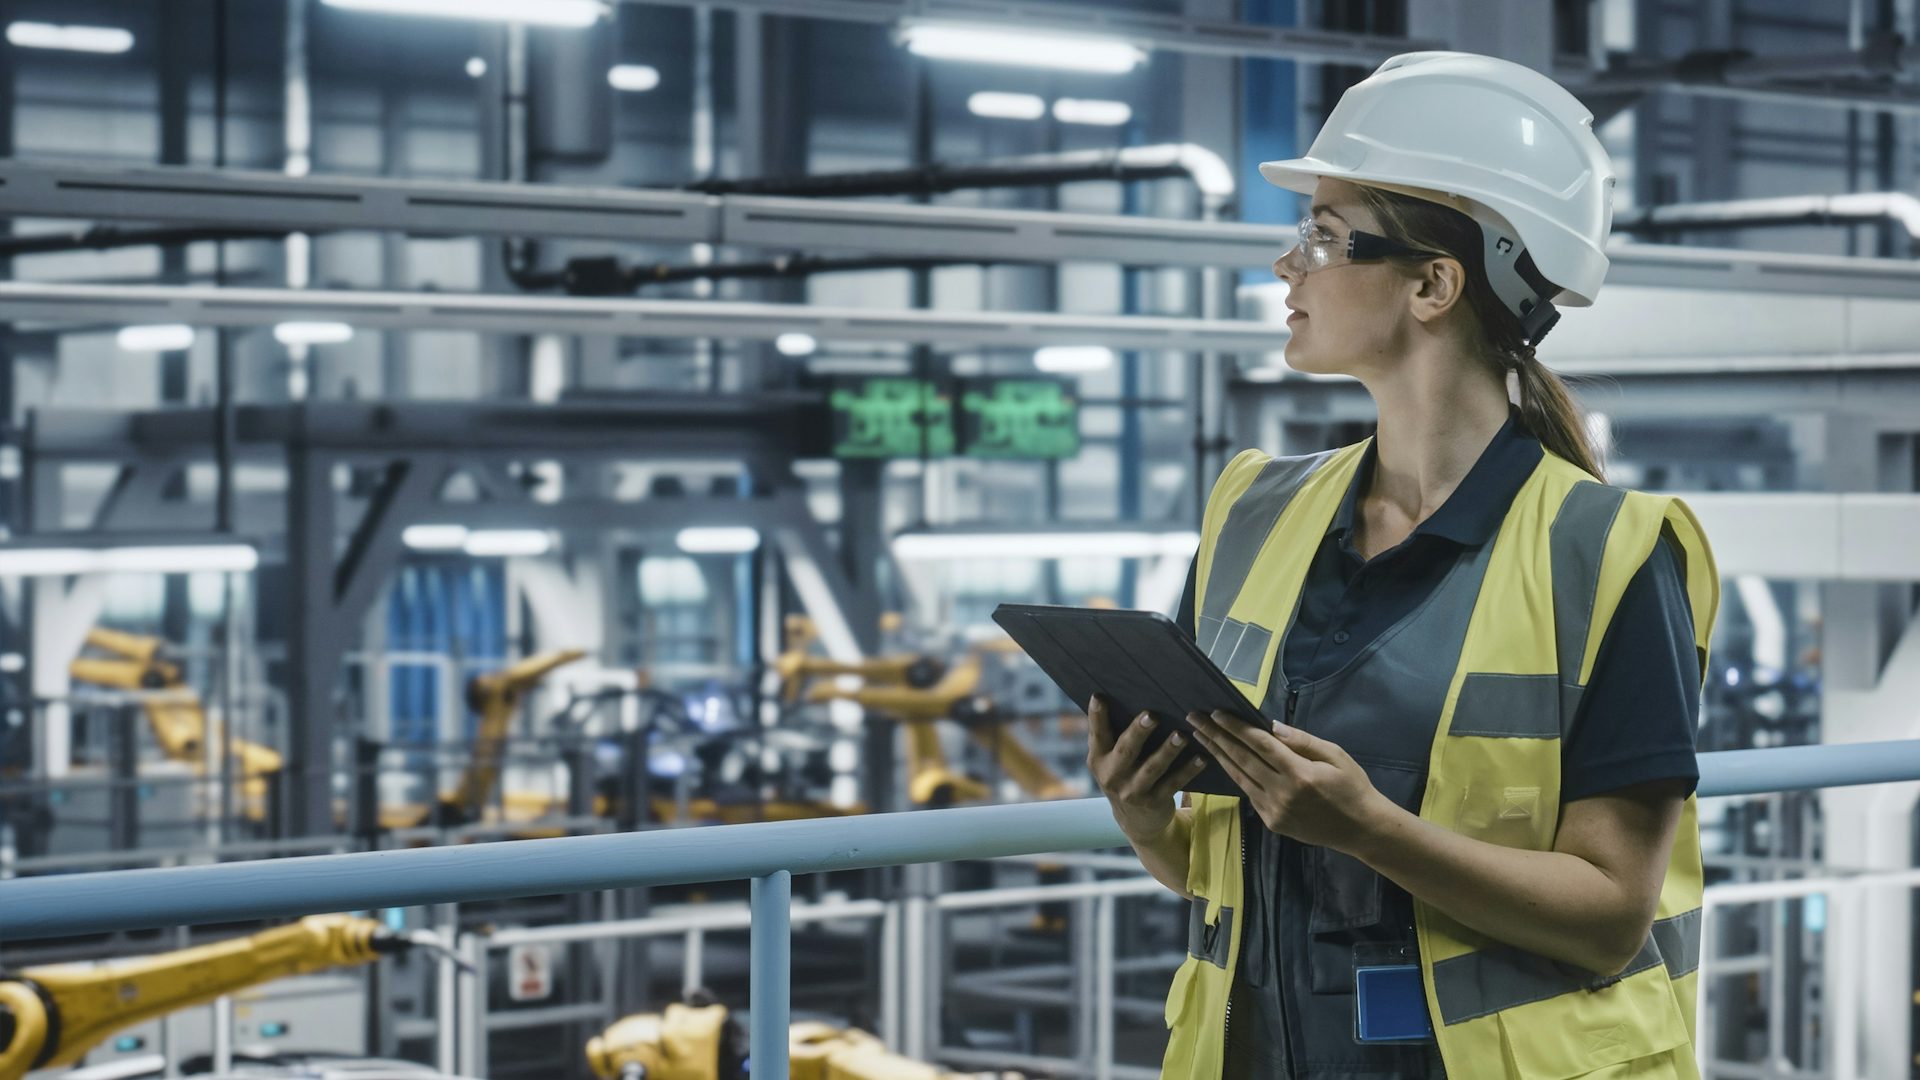 Woman in a manufacturing facility holding a tablet.